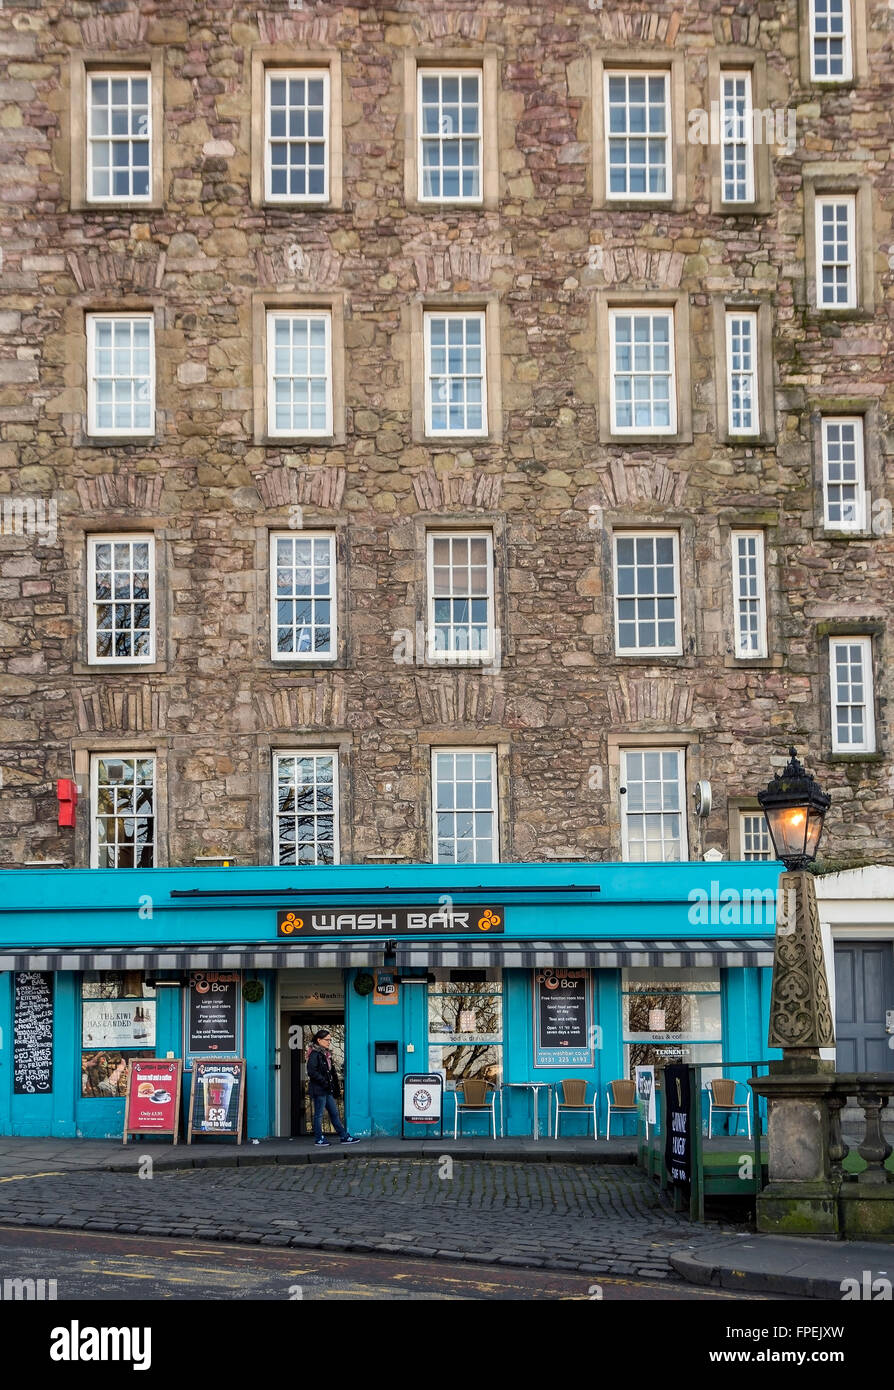 Beneath these old town apartments is one of Edinburgh's many pubs - the Wash bar is on the Mound, overlooking Princes Street. Stock Photo